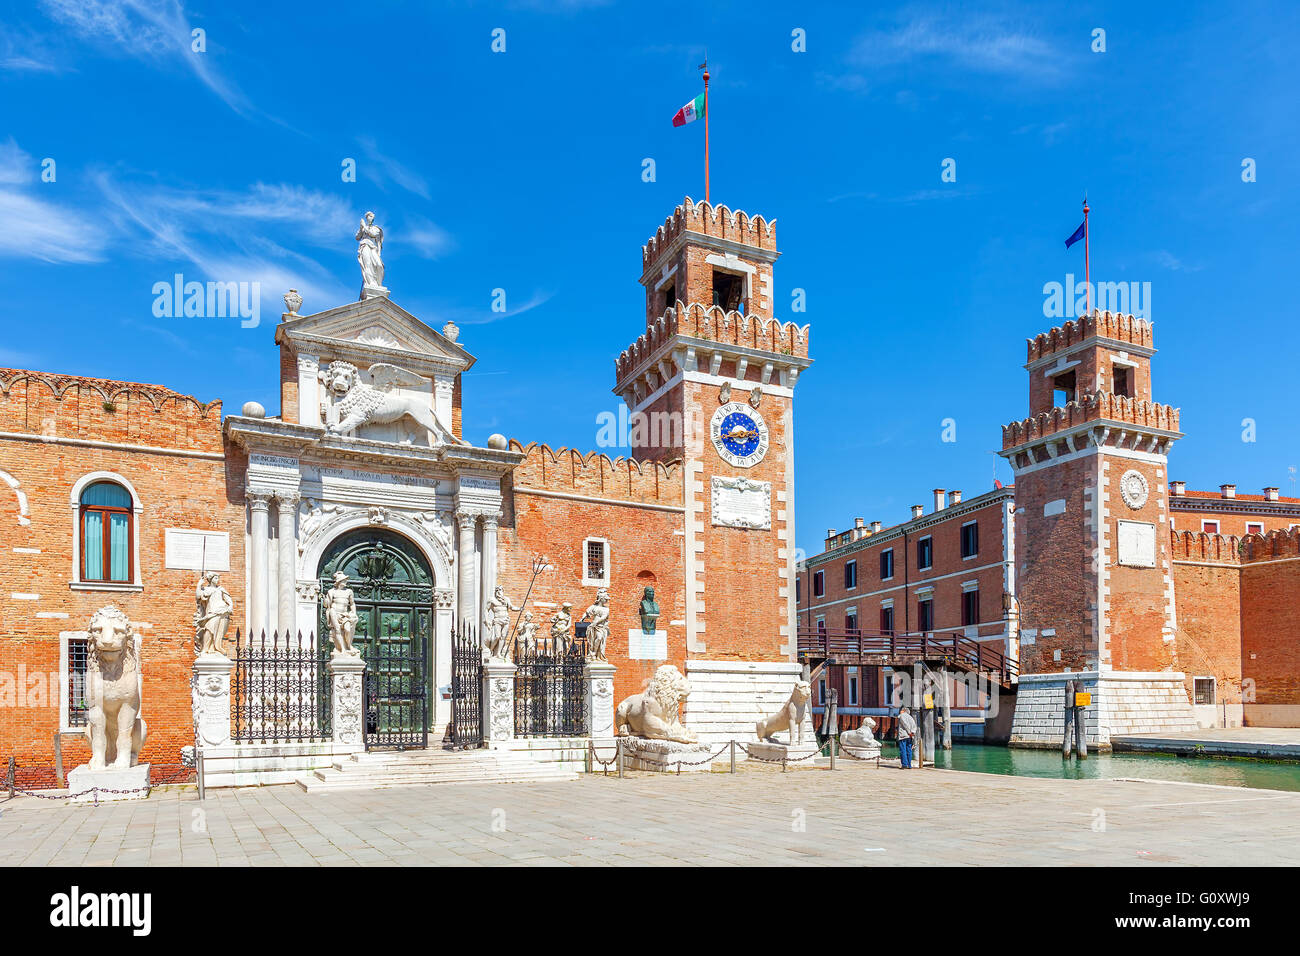 View of Venetian Arsenal under blue sky in Venice, Italy. Stock Photo